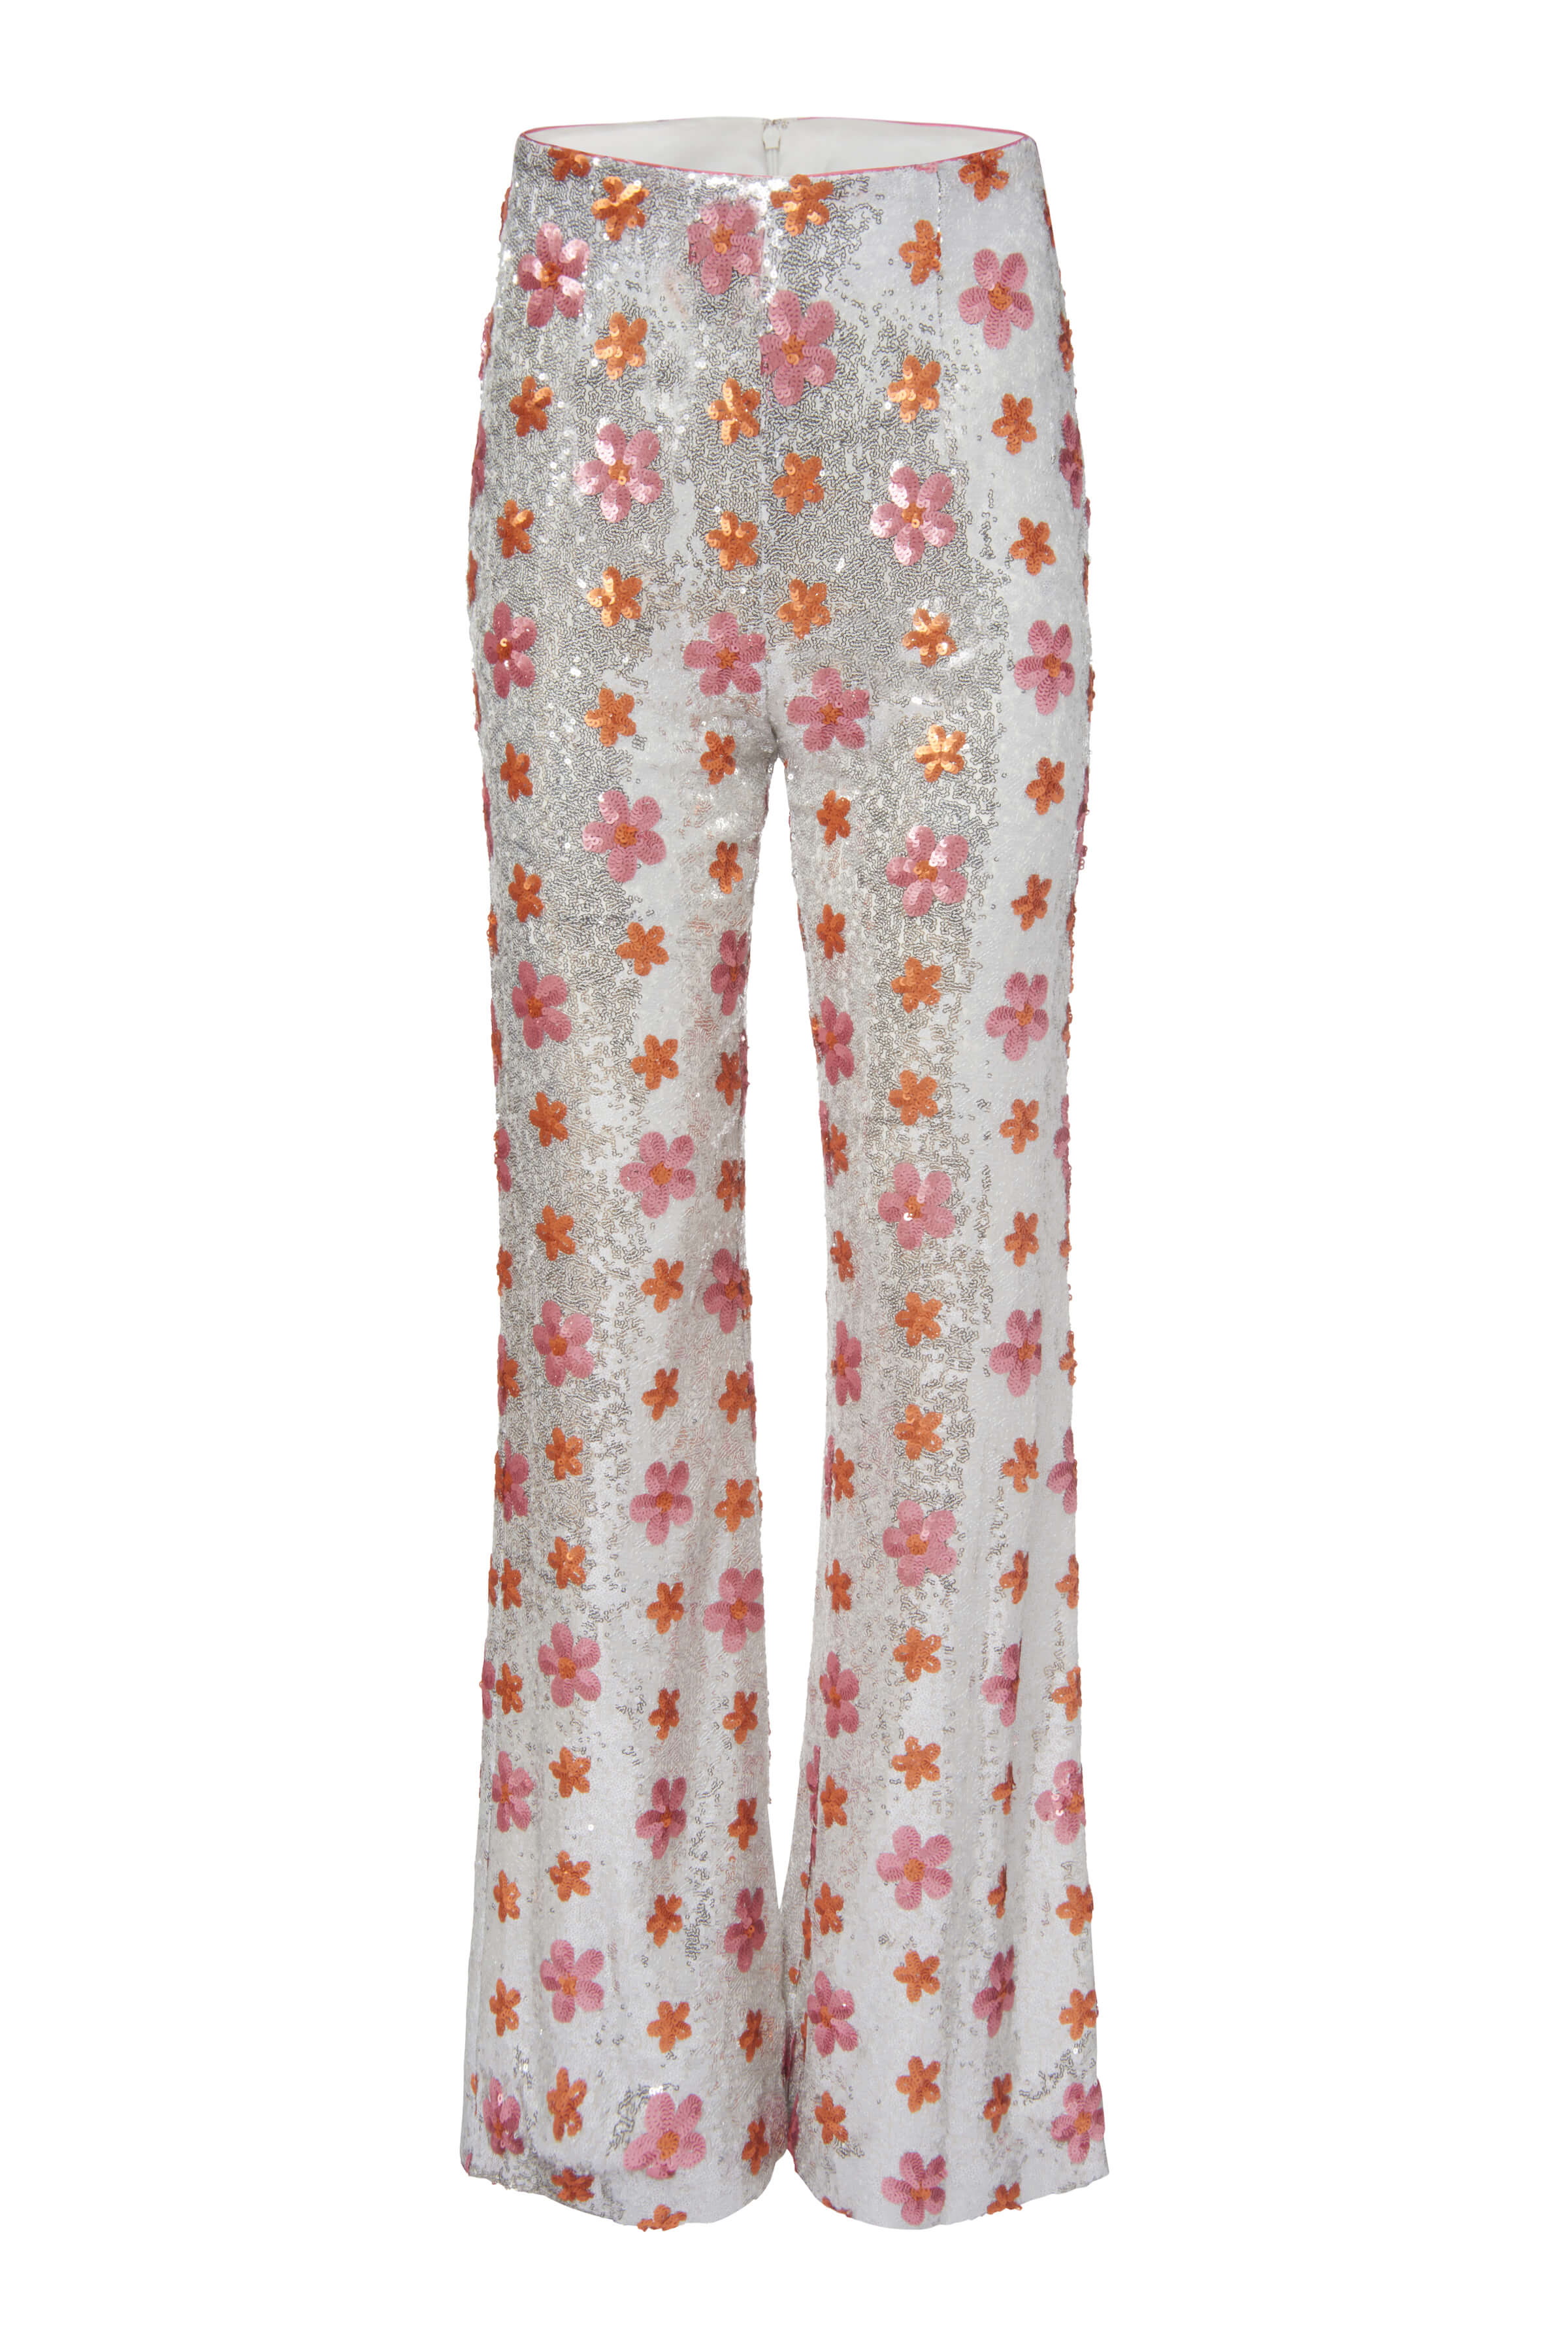 FINAL SALE: Ines Silver Sequin Floral Pant